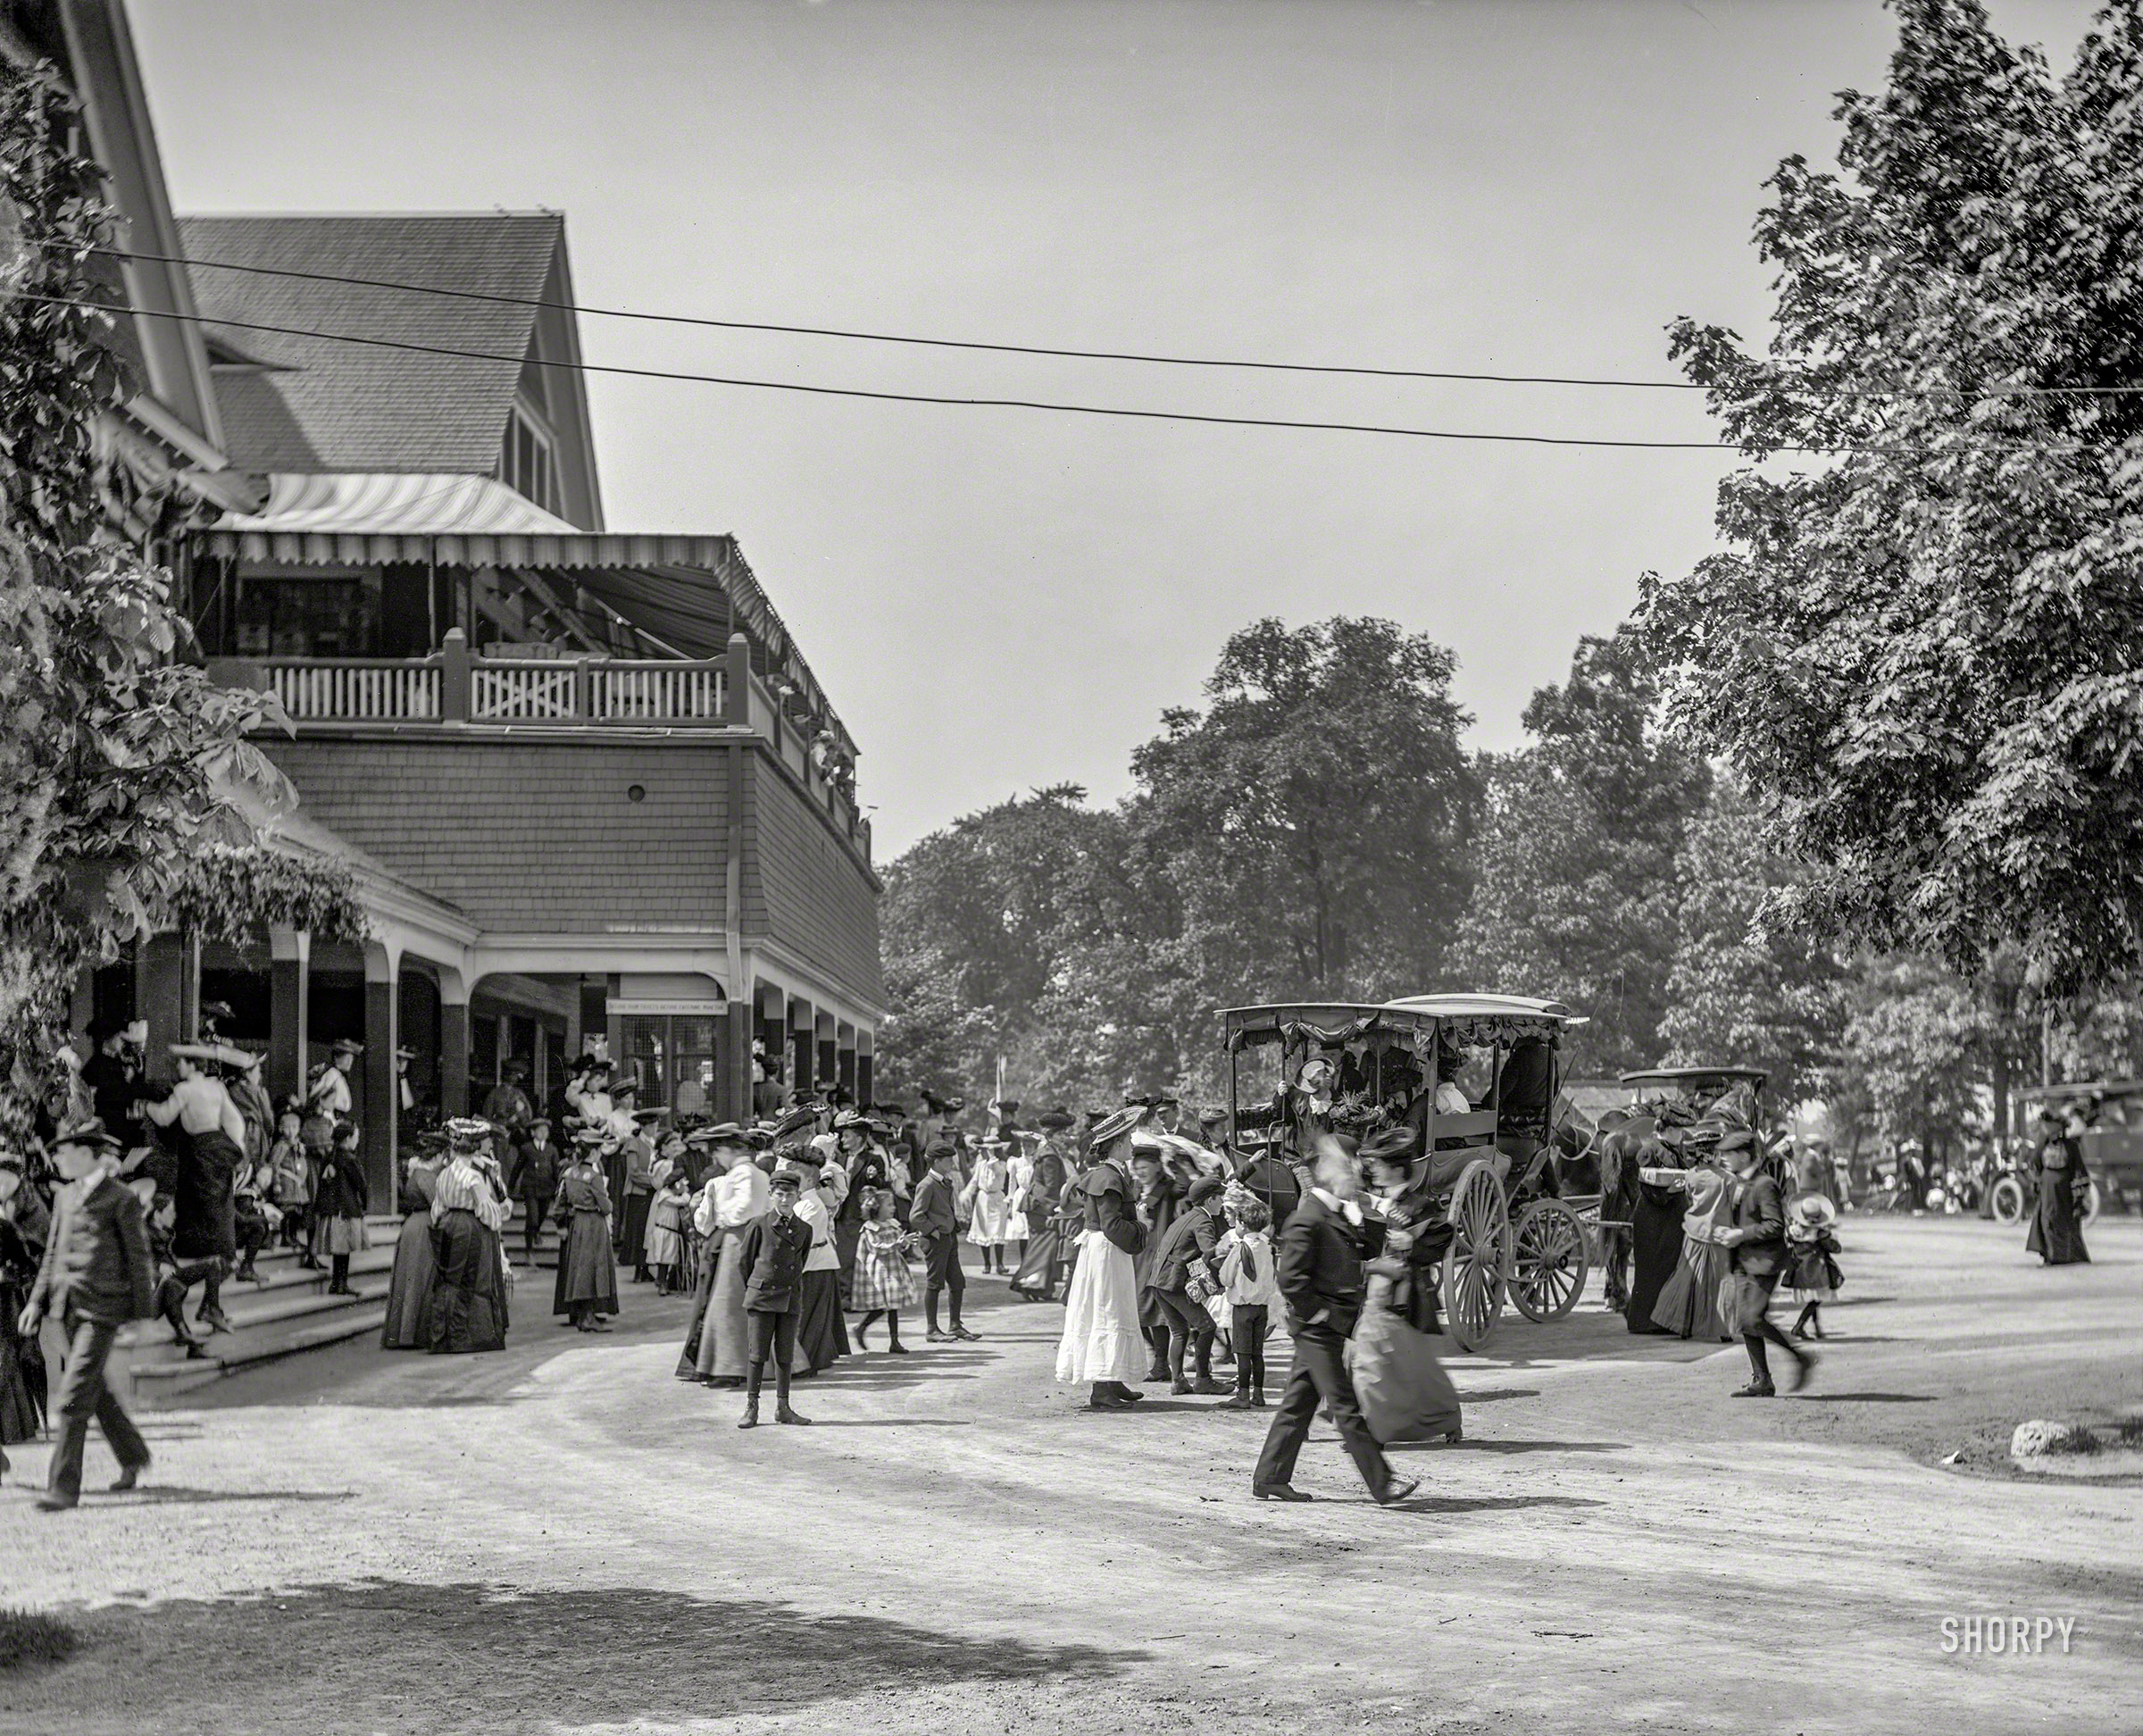 Detroit, Michigan, circa 1908. "Crowd at Belle Isle Park casino." 8x10 inch dry plate glass negative, Detroit Publishing Company. View full size.